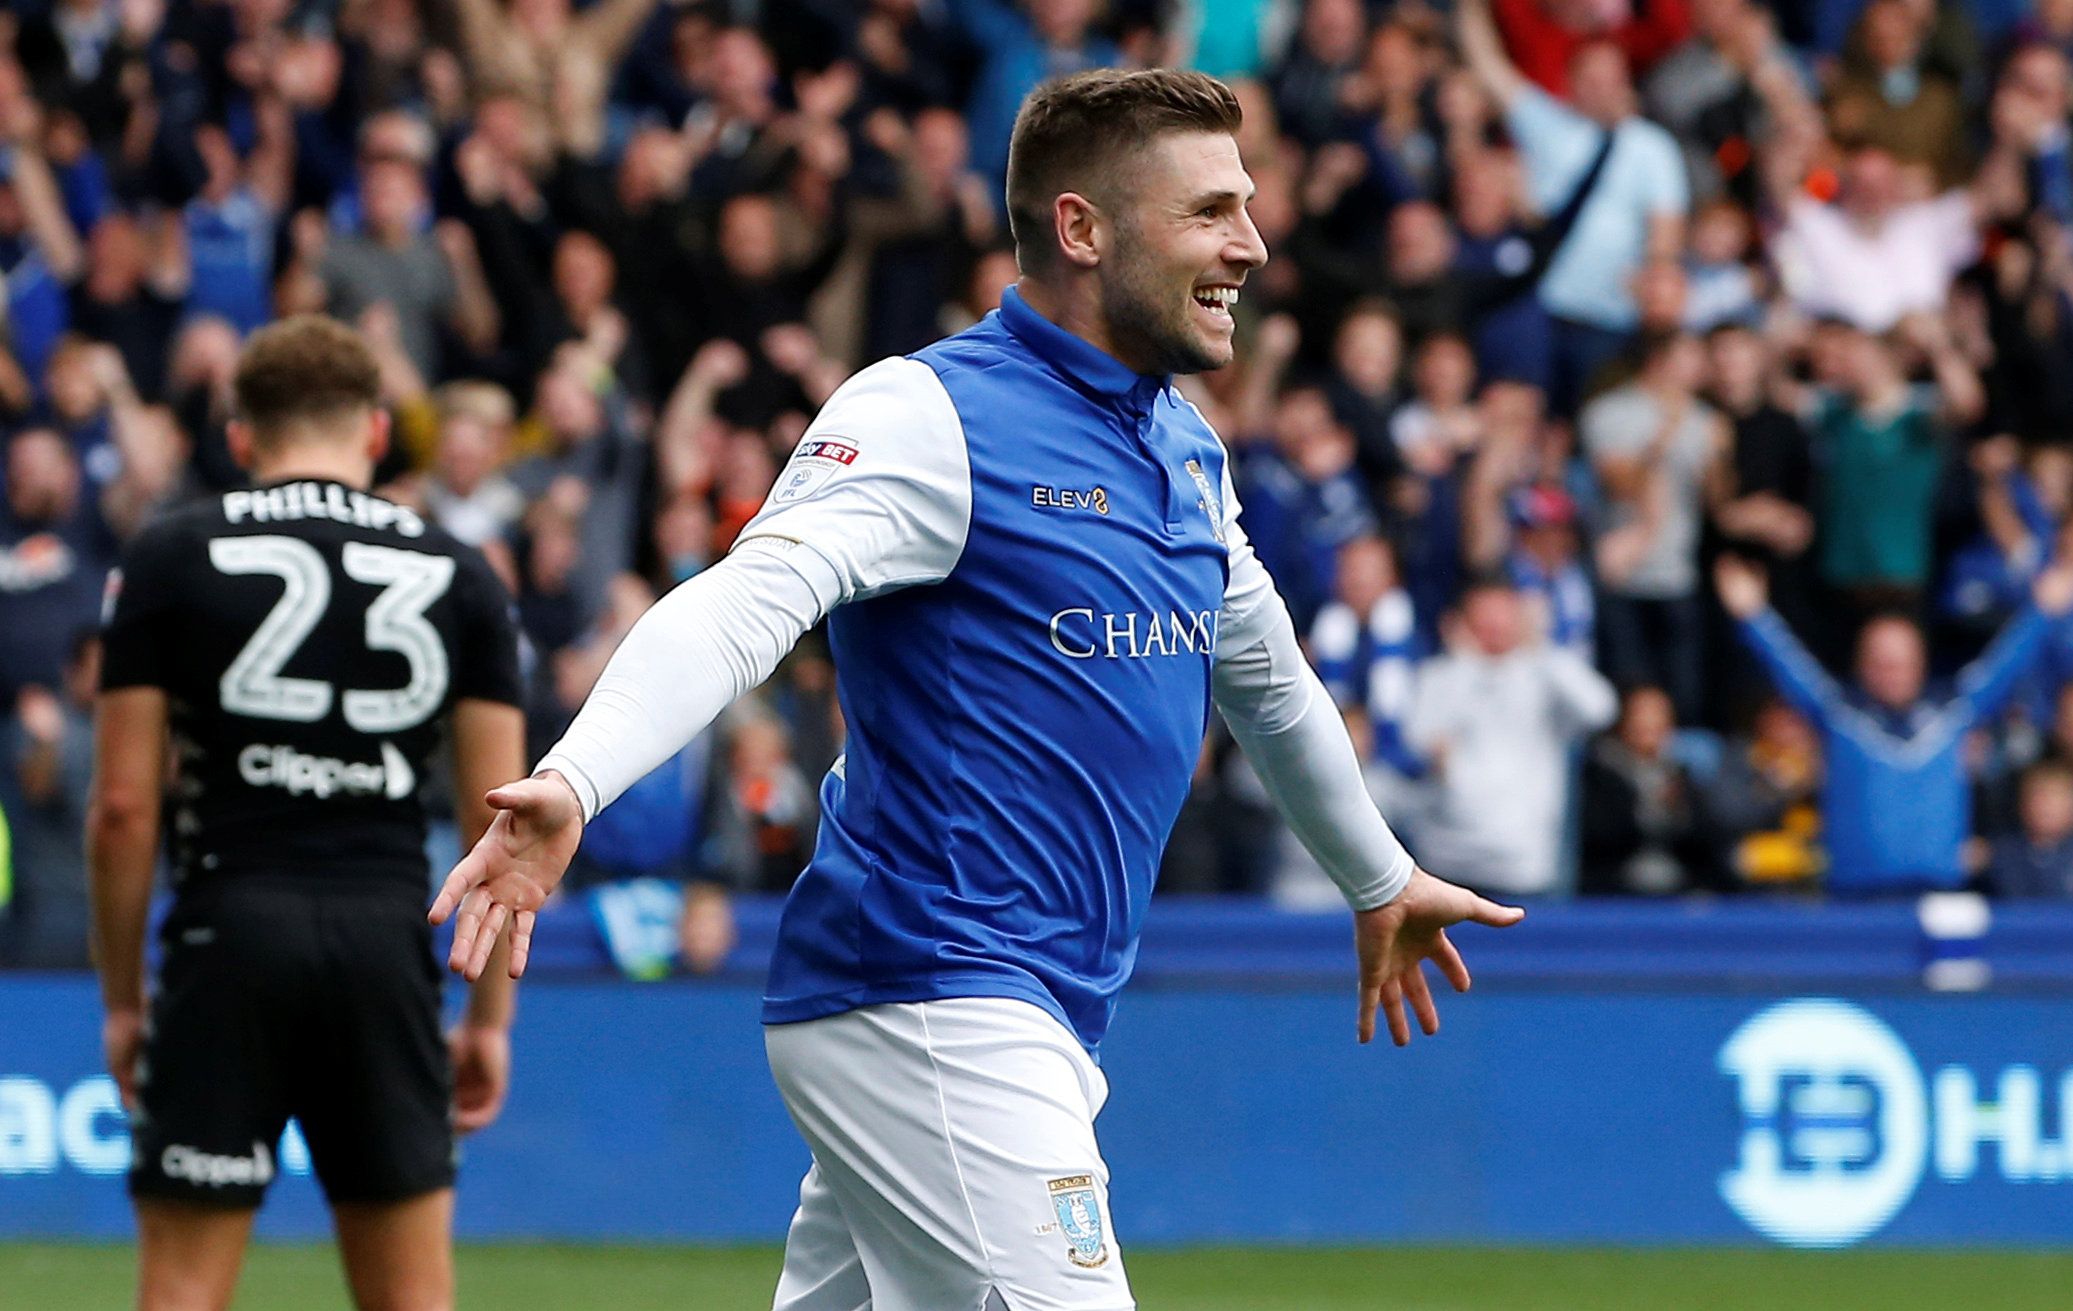 Soccer Football - Championship - Sheffield Wednesday vs Leeds United - Hillsborough, Sheffield, Britain - October 1, 2017   Sheffield Wednesday's Gary Hooper celebrates after he scores his sides first goal   Action Images/Craig Brough  EDITORIAL USE ONLY. No use with unauthorized audio, video, data, fixture lists, club/league logos or 